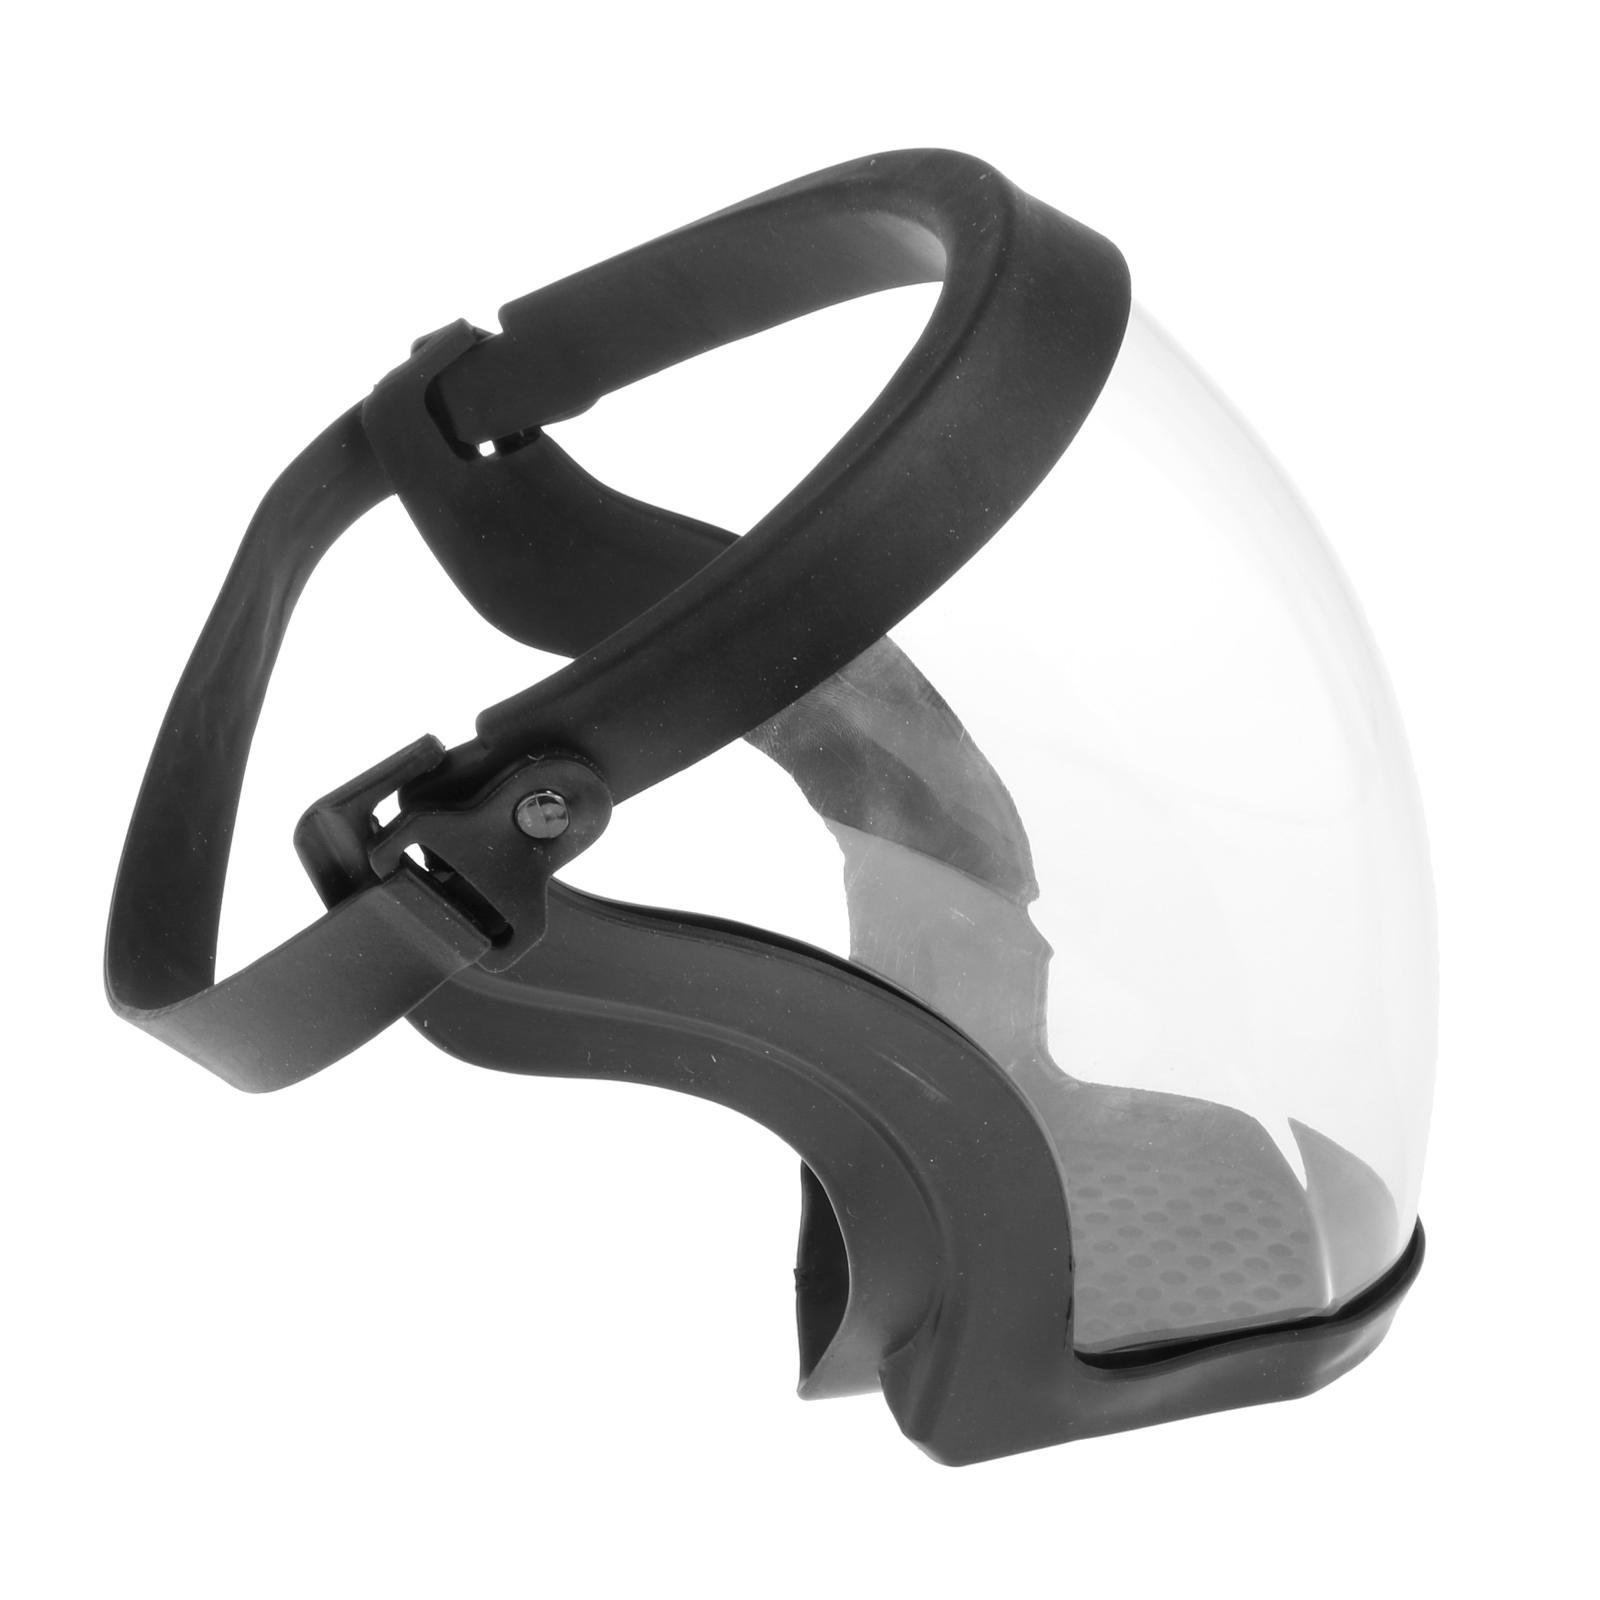 Reusable Full Face Shield PC Covering Clear UV-Protect Visor Protect Cover